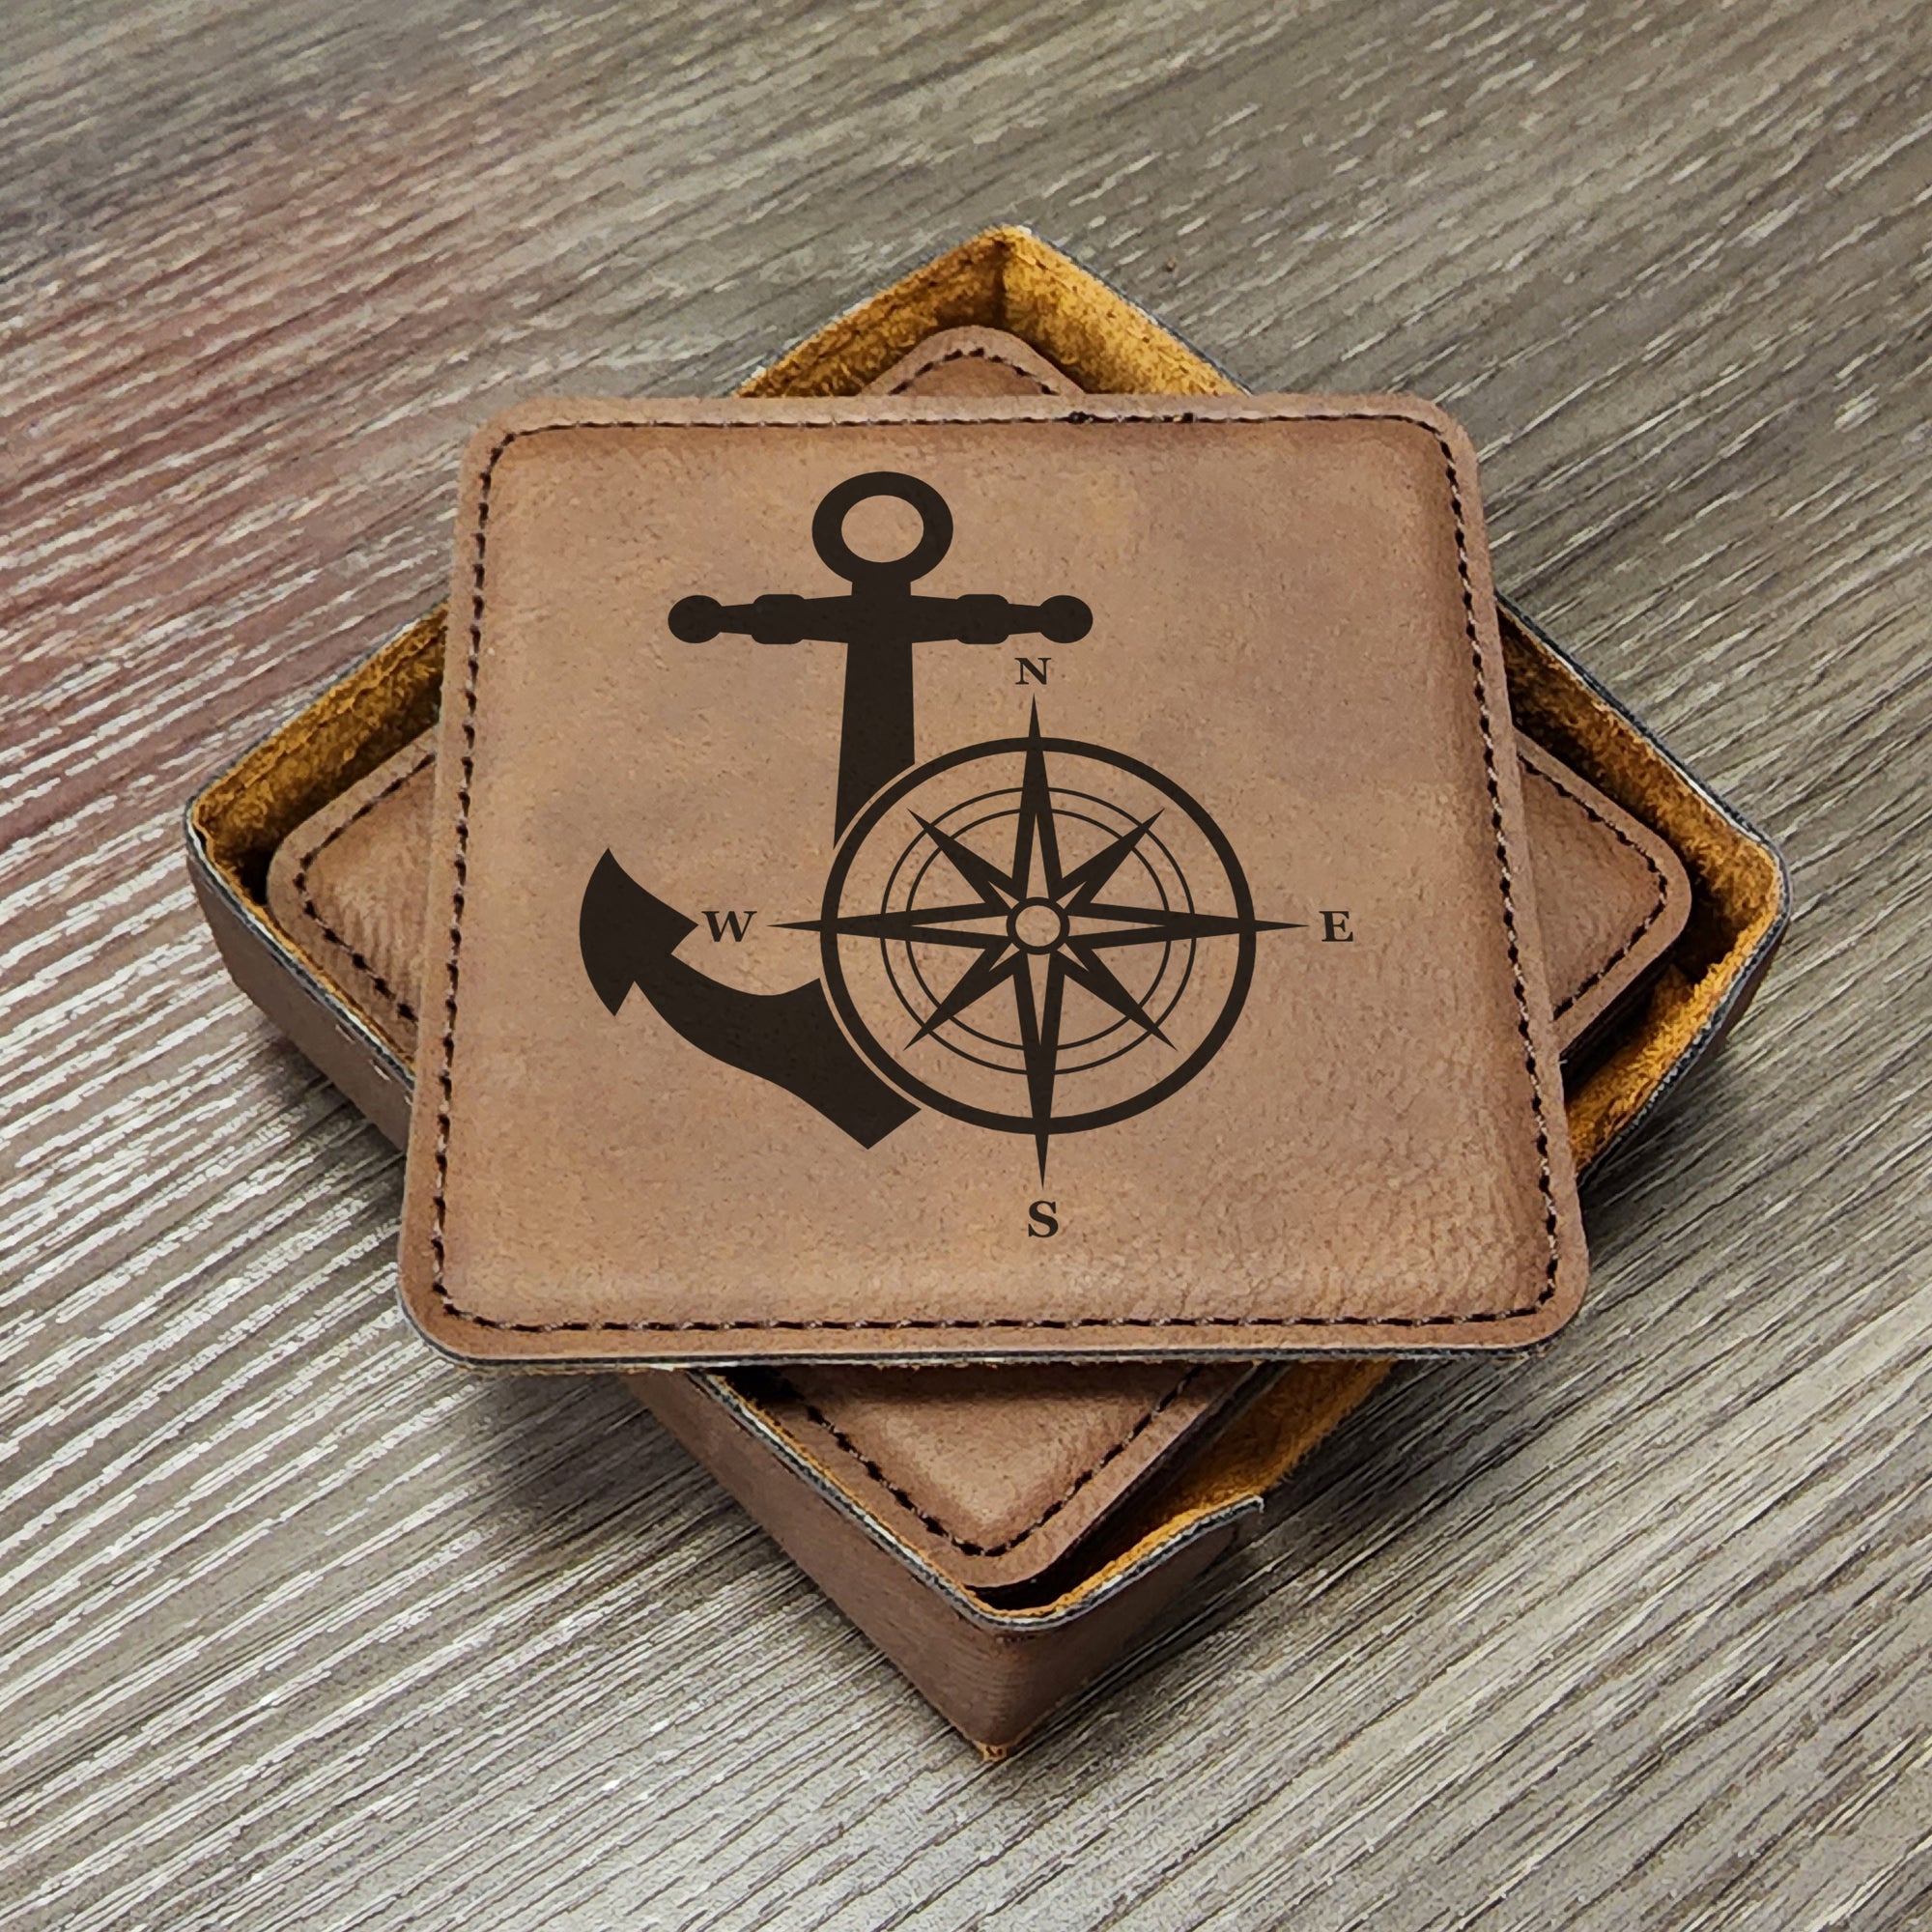 Sailing Themed Leather Coaster w/ Anchor and Compass, Great for Yacht Clubs, Nautical Themed Vacation Home & Gifts, Set of 6 With Holder